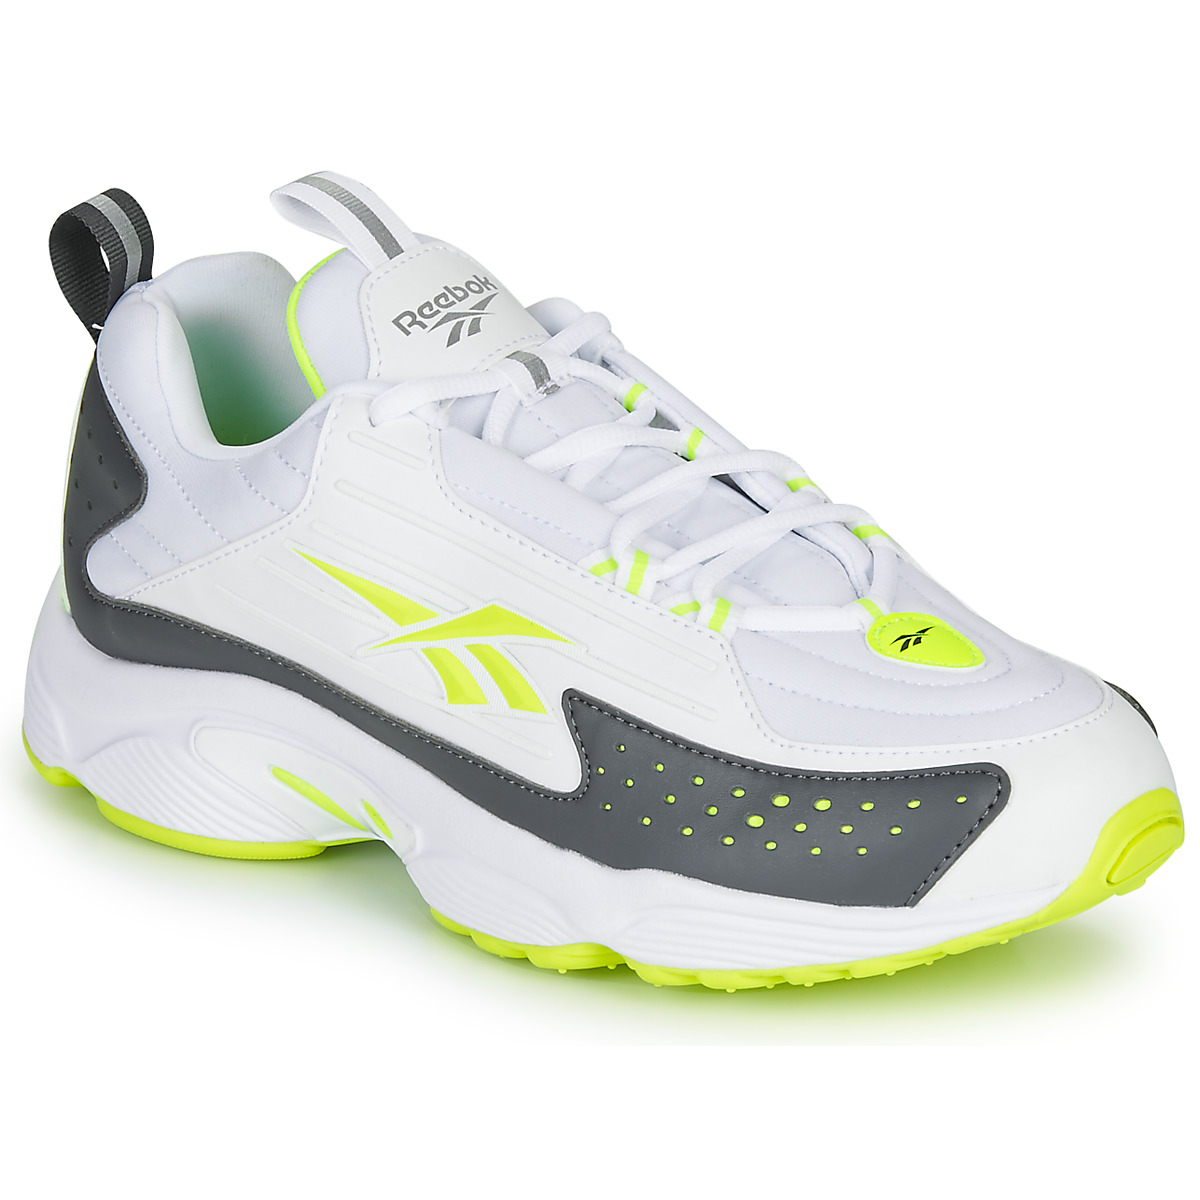 Reebok Classic DMX SERIES 2200 White - Fast delivery | Spartoo 